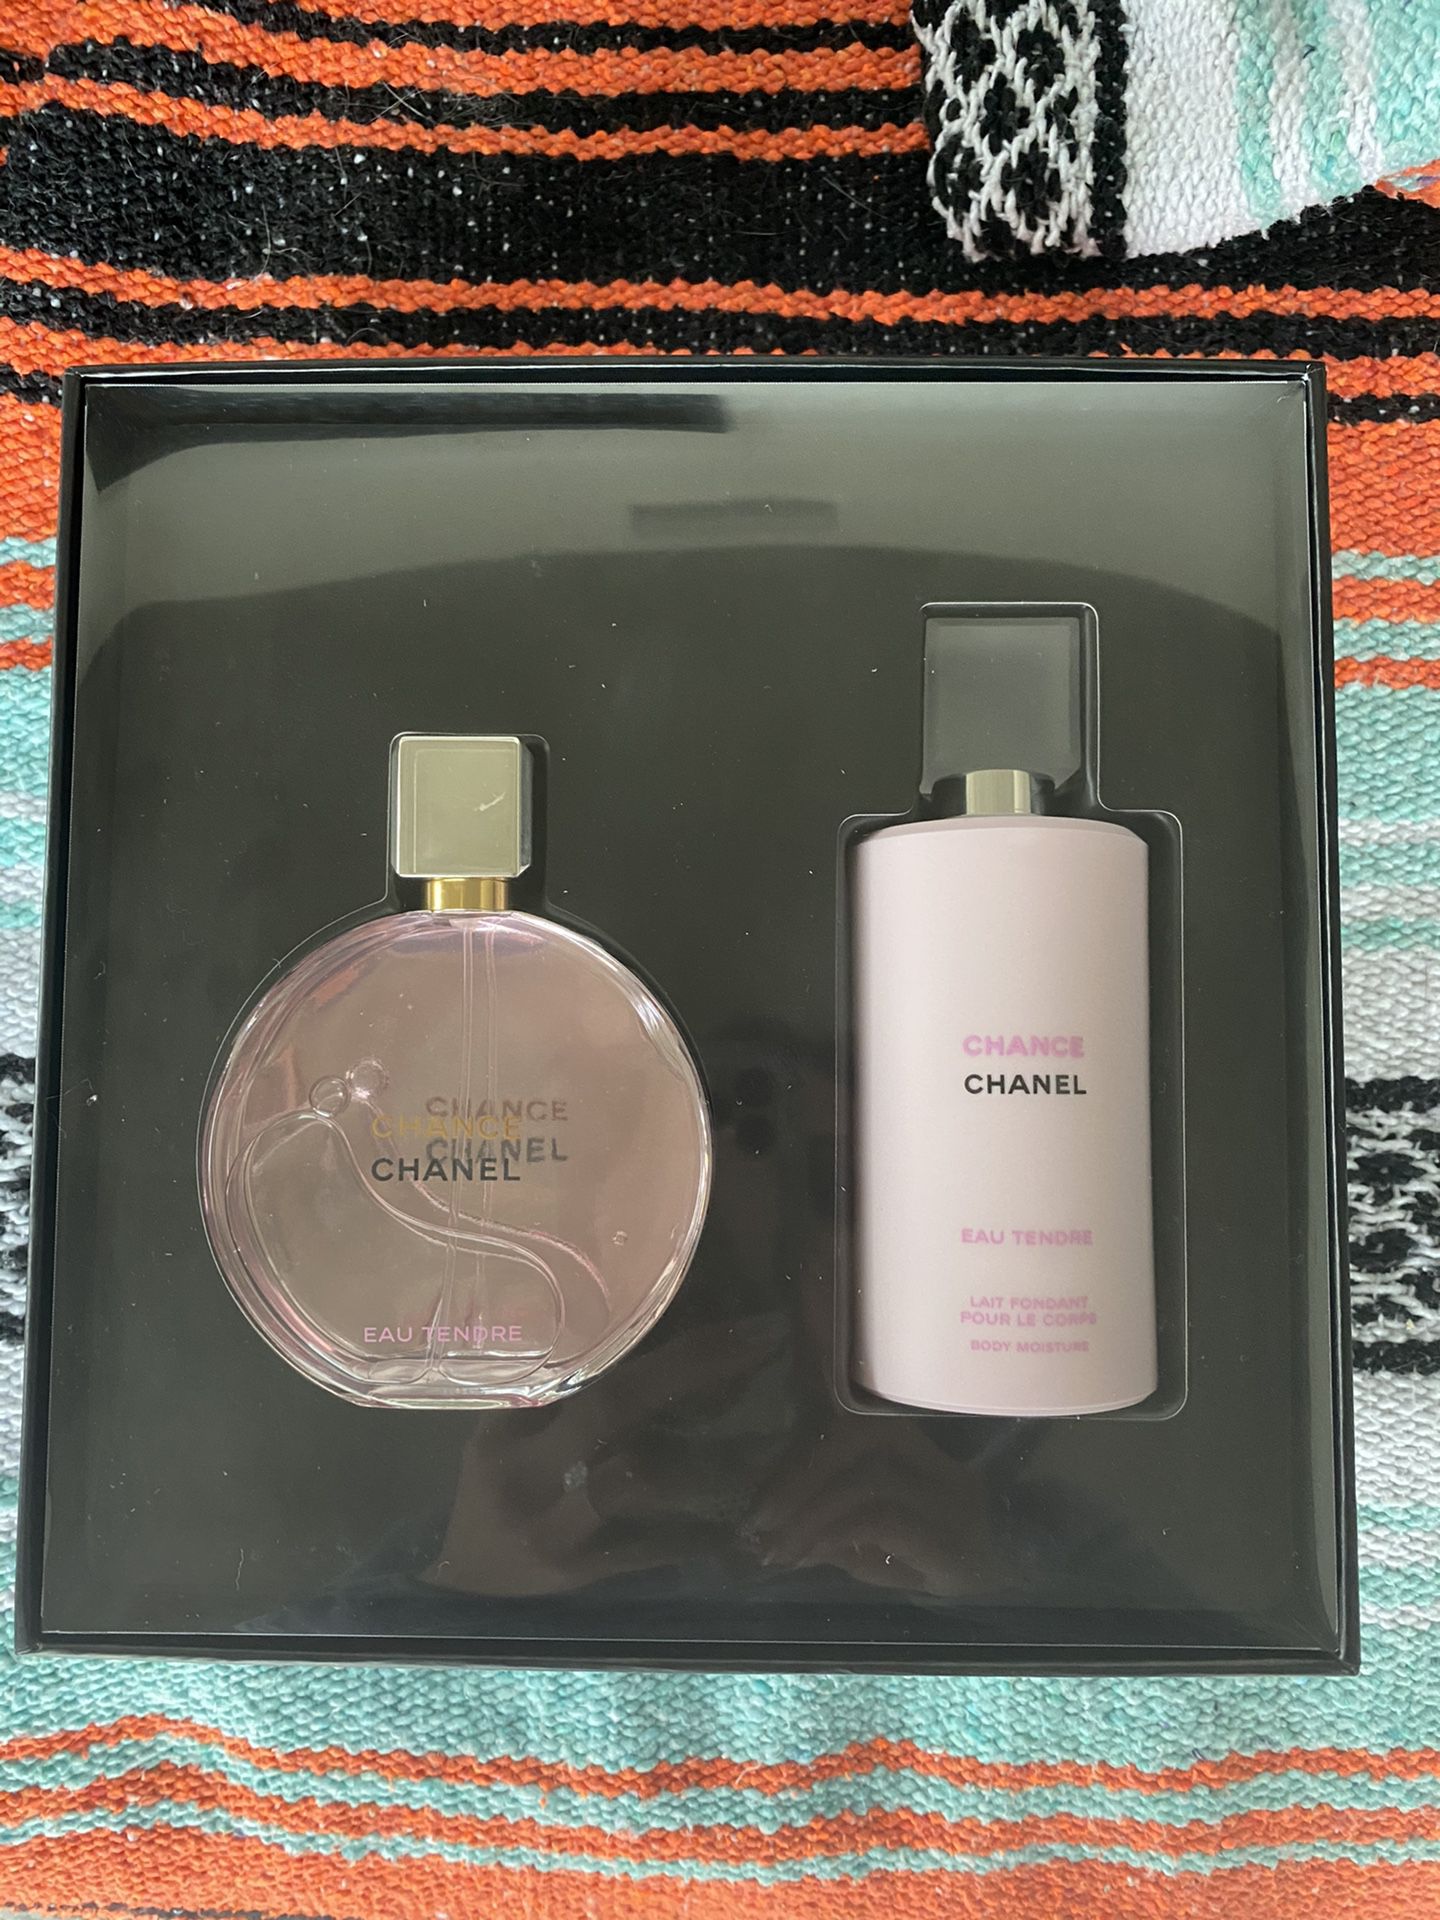 Chanel chance perfume and lotion set full size brand new